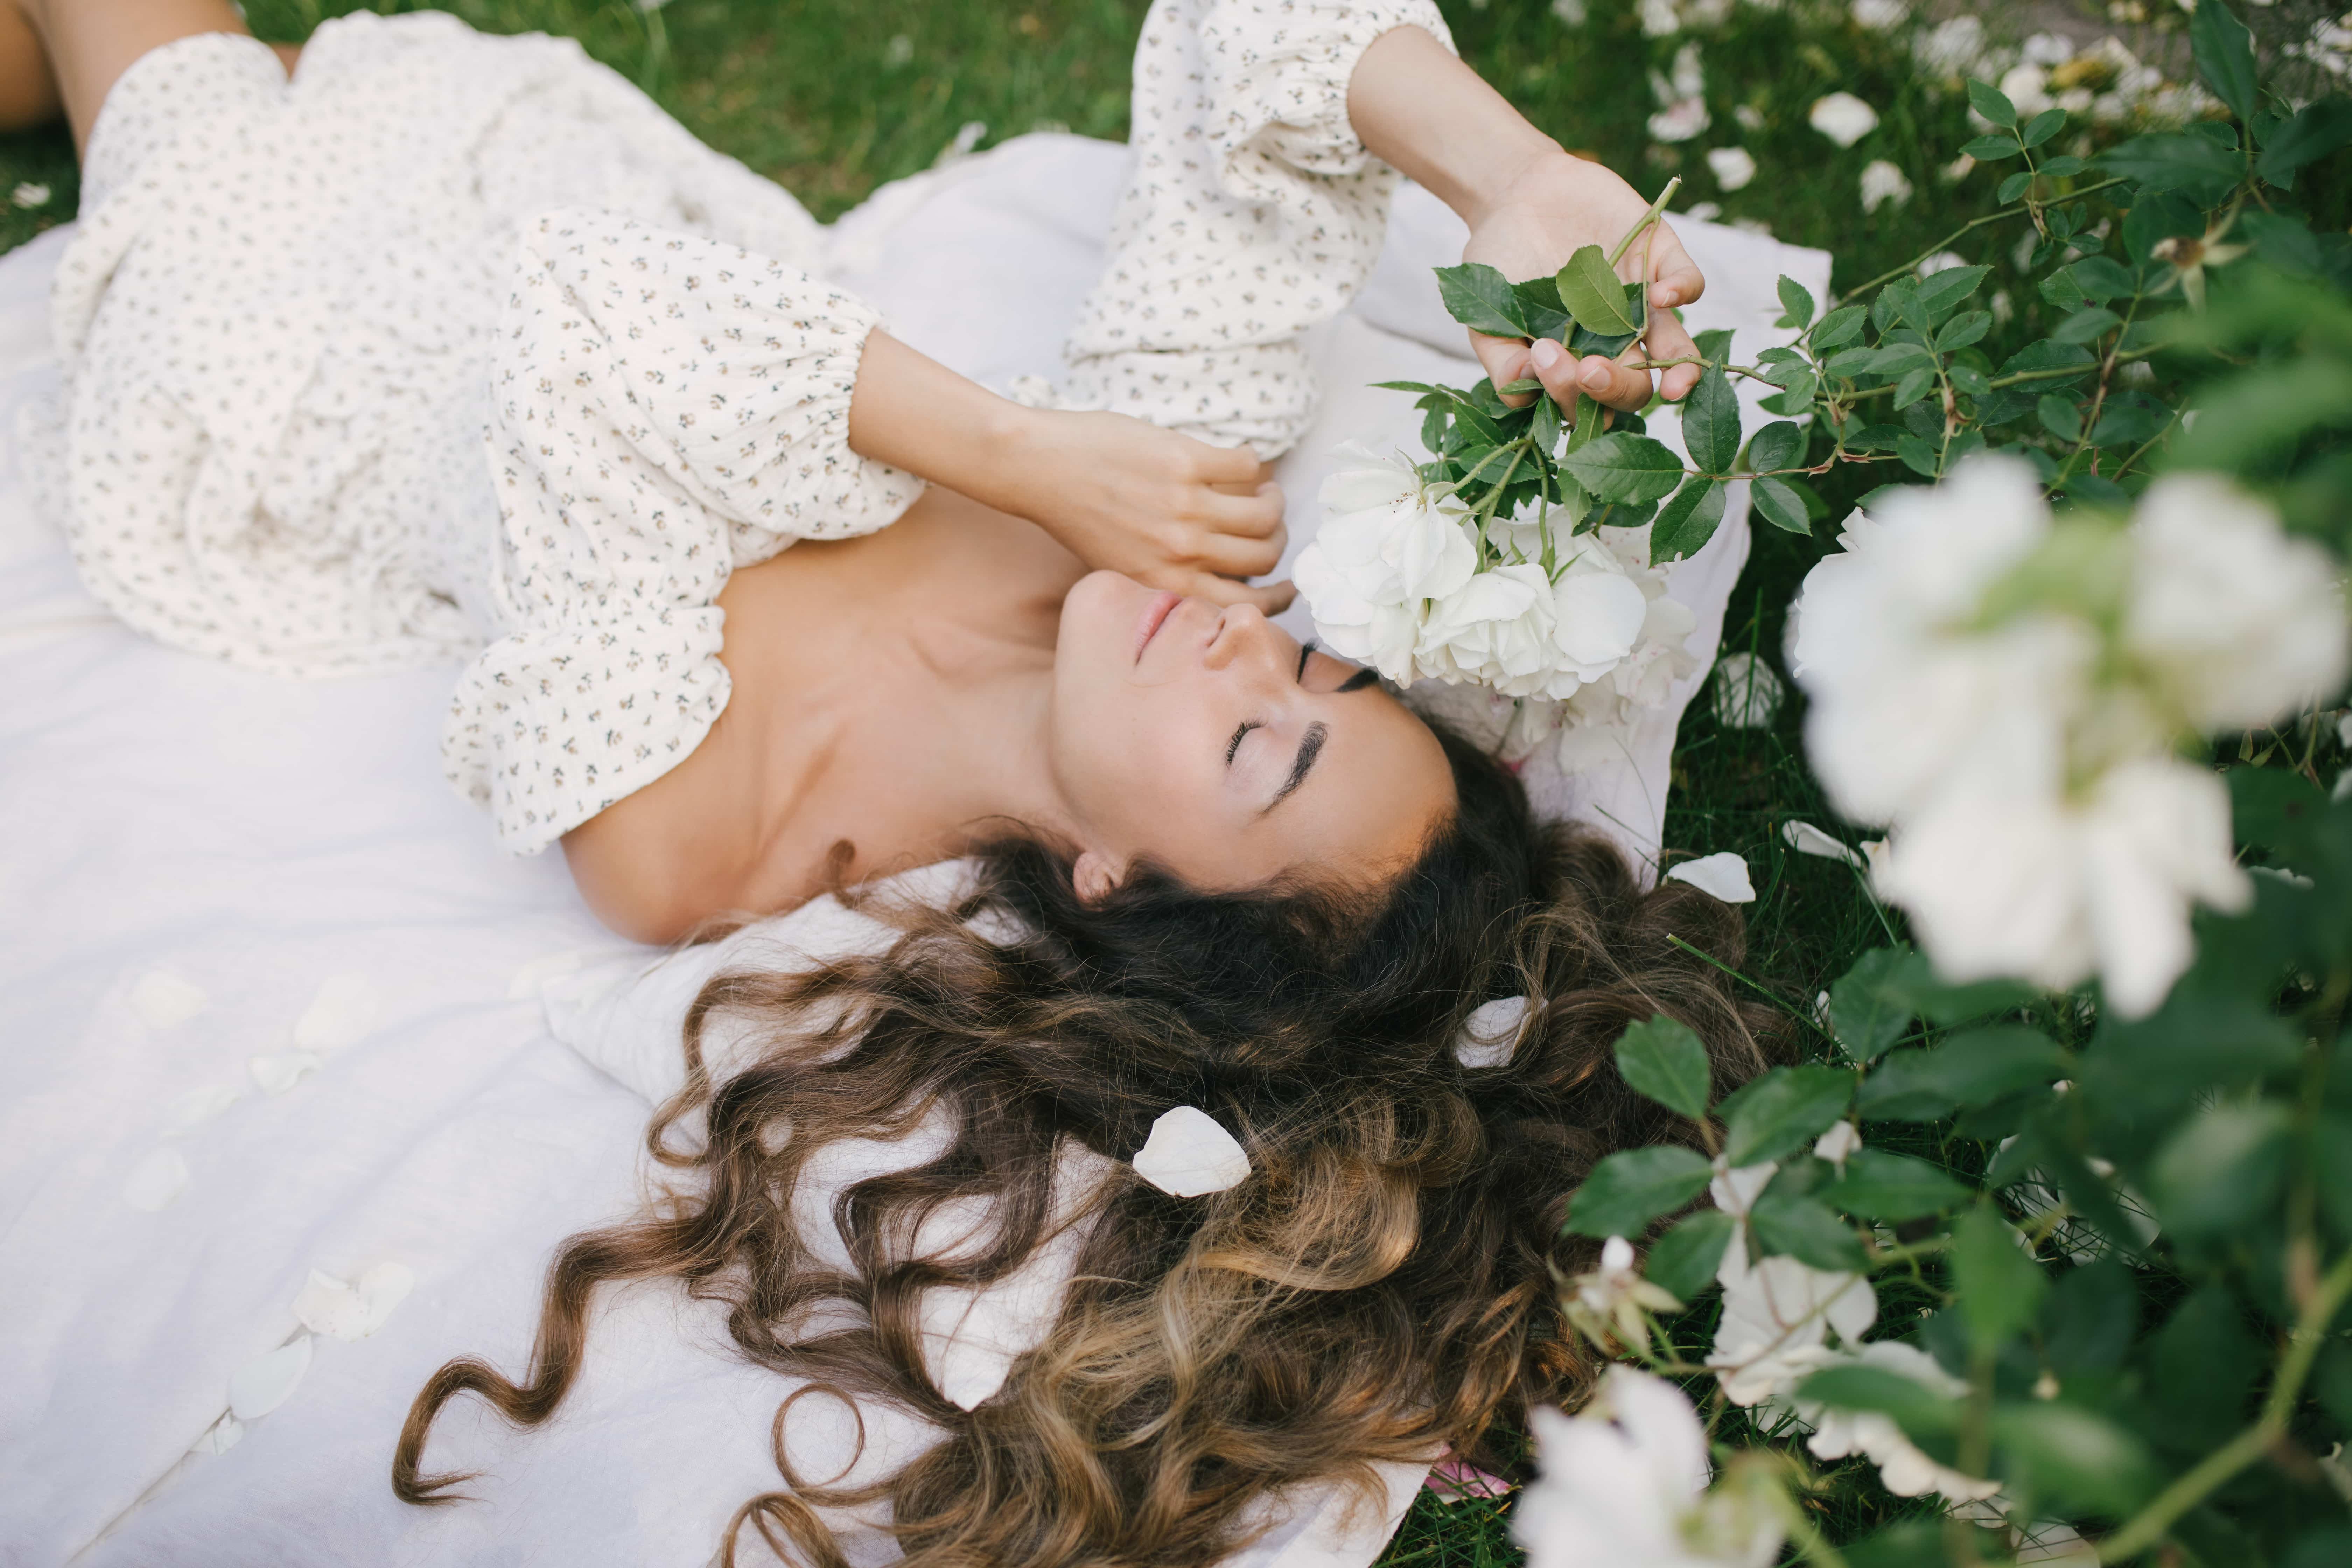 Young beautiful woman lying on the grass with long curly hair wearing white dress 